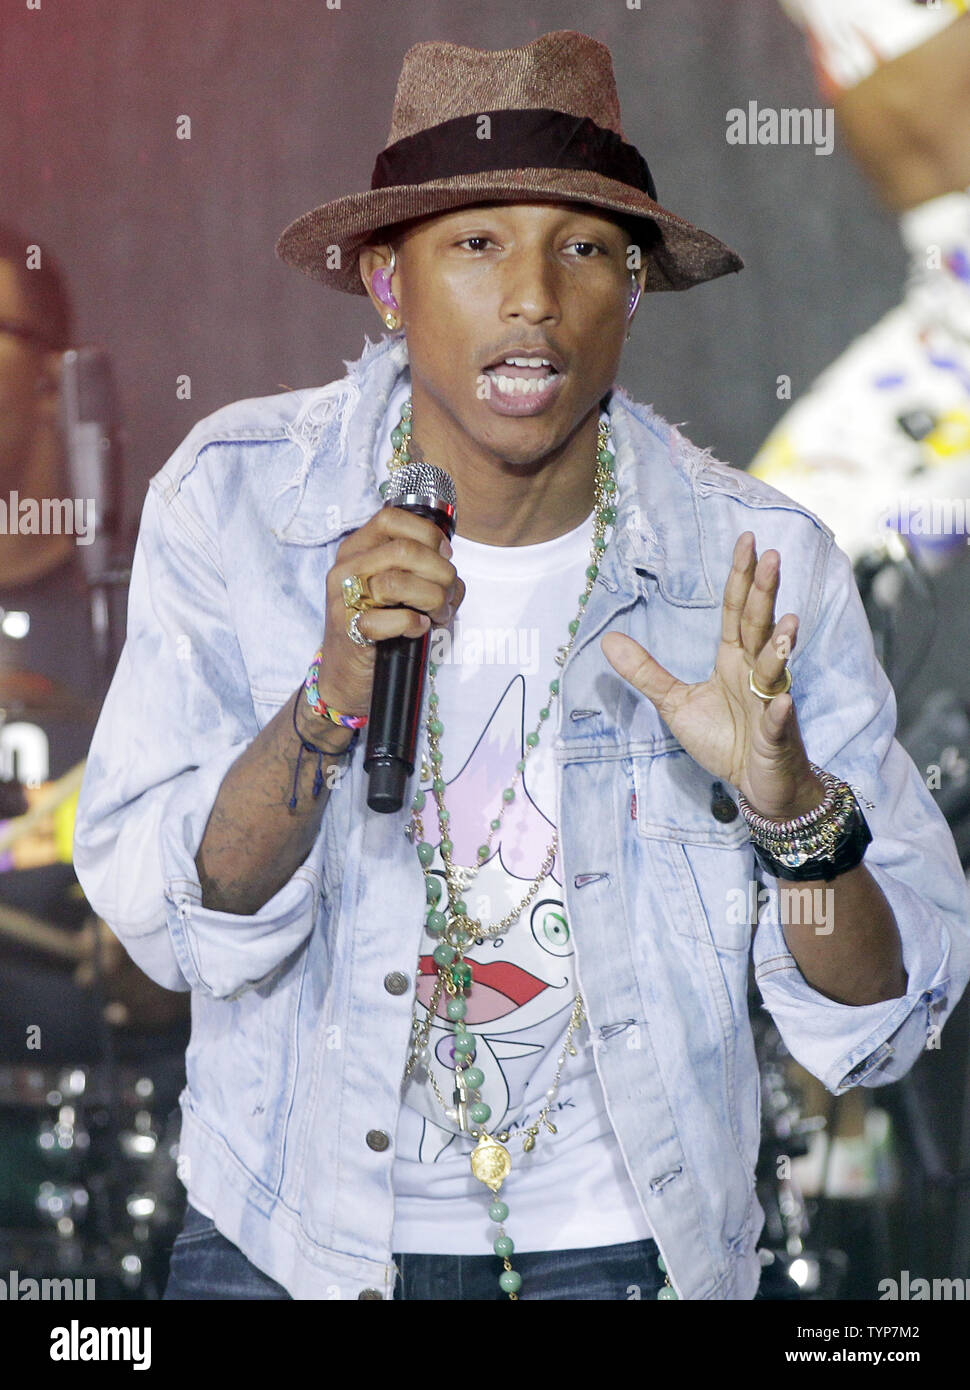 Singer-rapper-producer Pharrell Williams is a 'Happy' man